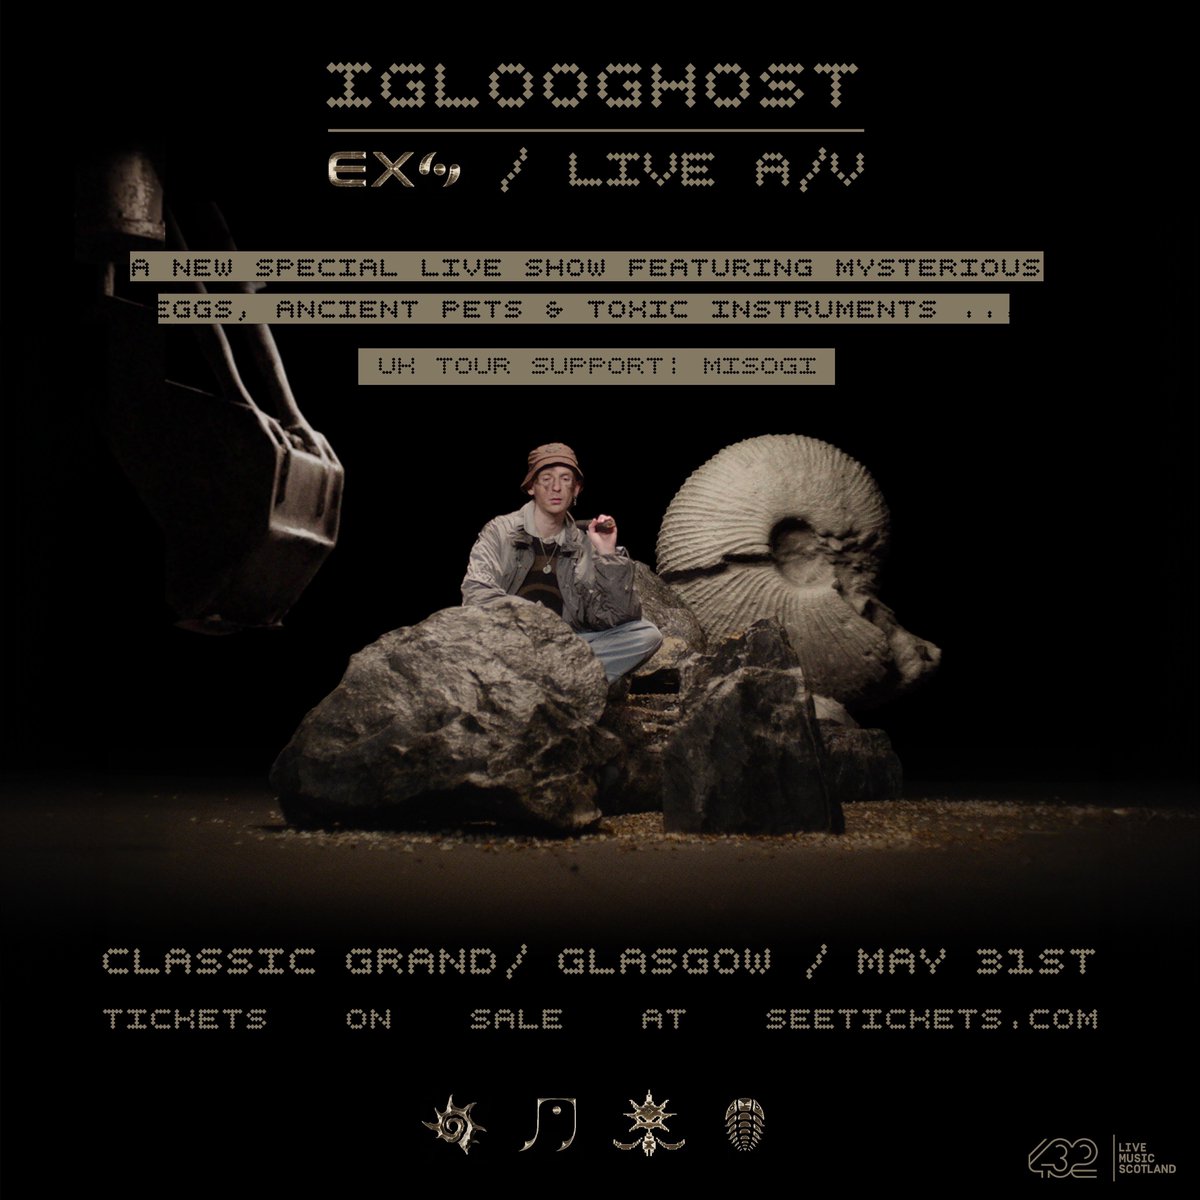 .@IGLOOGHOST presents 'ᕮⵋම' - a new live audio/visual show expanding on the Tidal Memory Exo album world - including mysterious eggs, ancient pets, and toxic instruments. Coming to @ClassicGrand, on 31 May ✨ Support from Misogi. Tickets on sale NOW ➡ bit.ly/43dXL1b